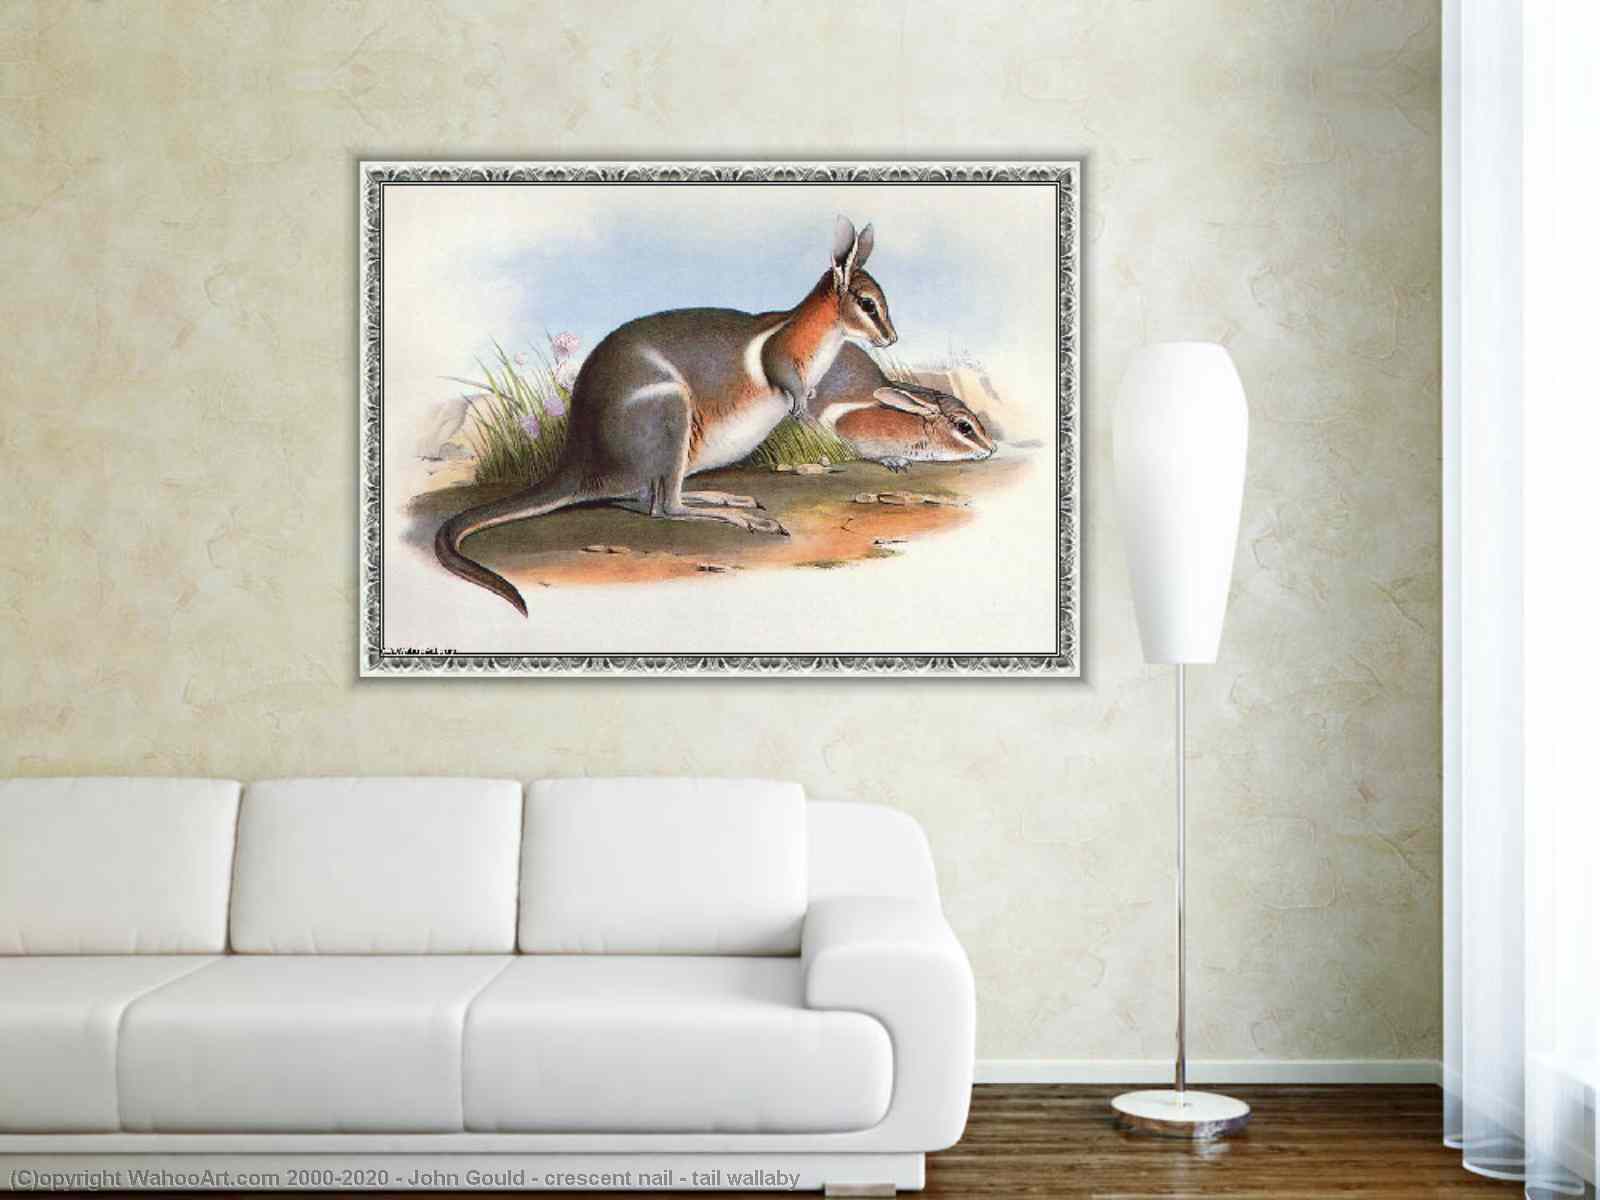 EXTINCT The crescent nail-tail wallaby, also known as the worong  (Onychogalea lunata), was a small species of marsupial that grazed on  grasses in the scrub and woodlands of southwestern and central Australia.